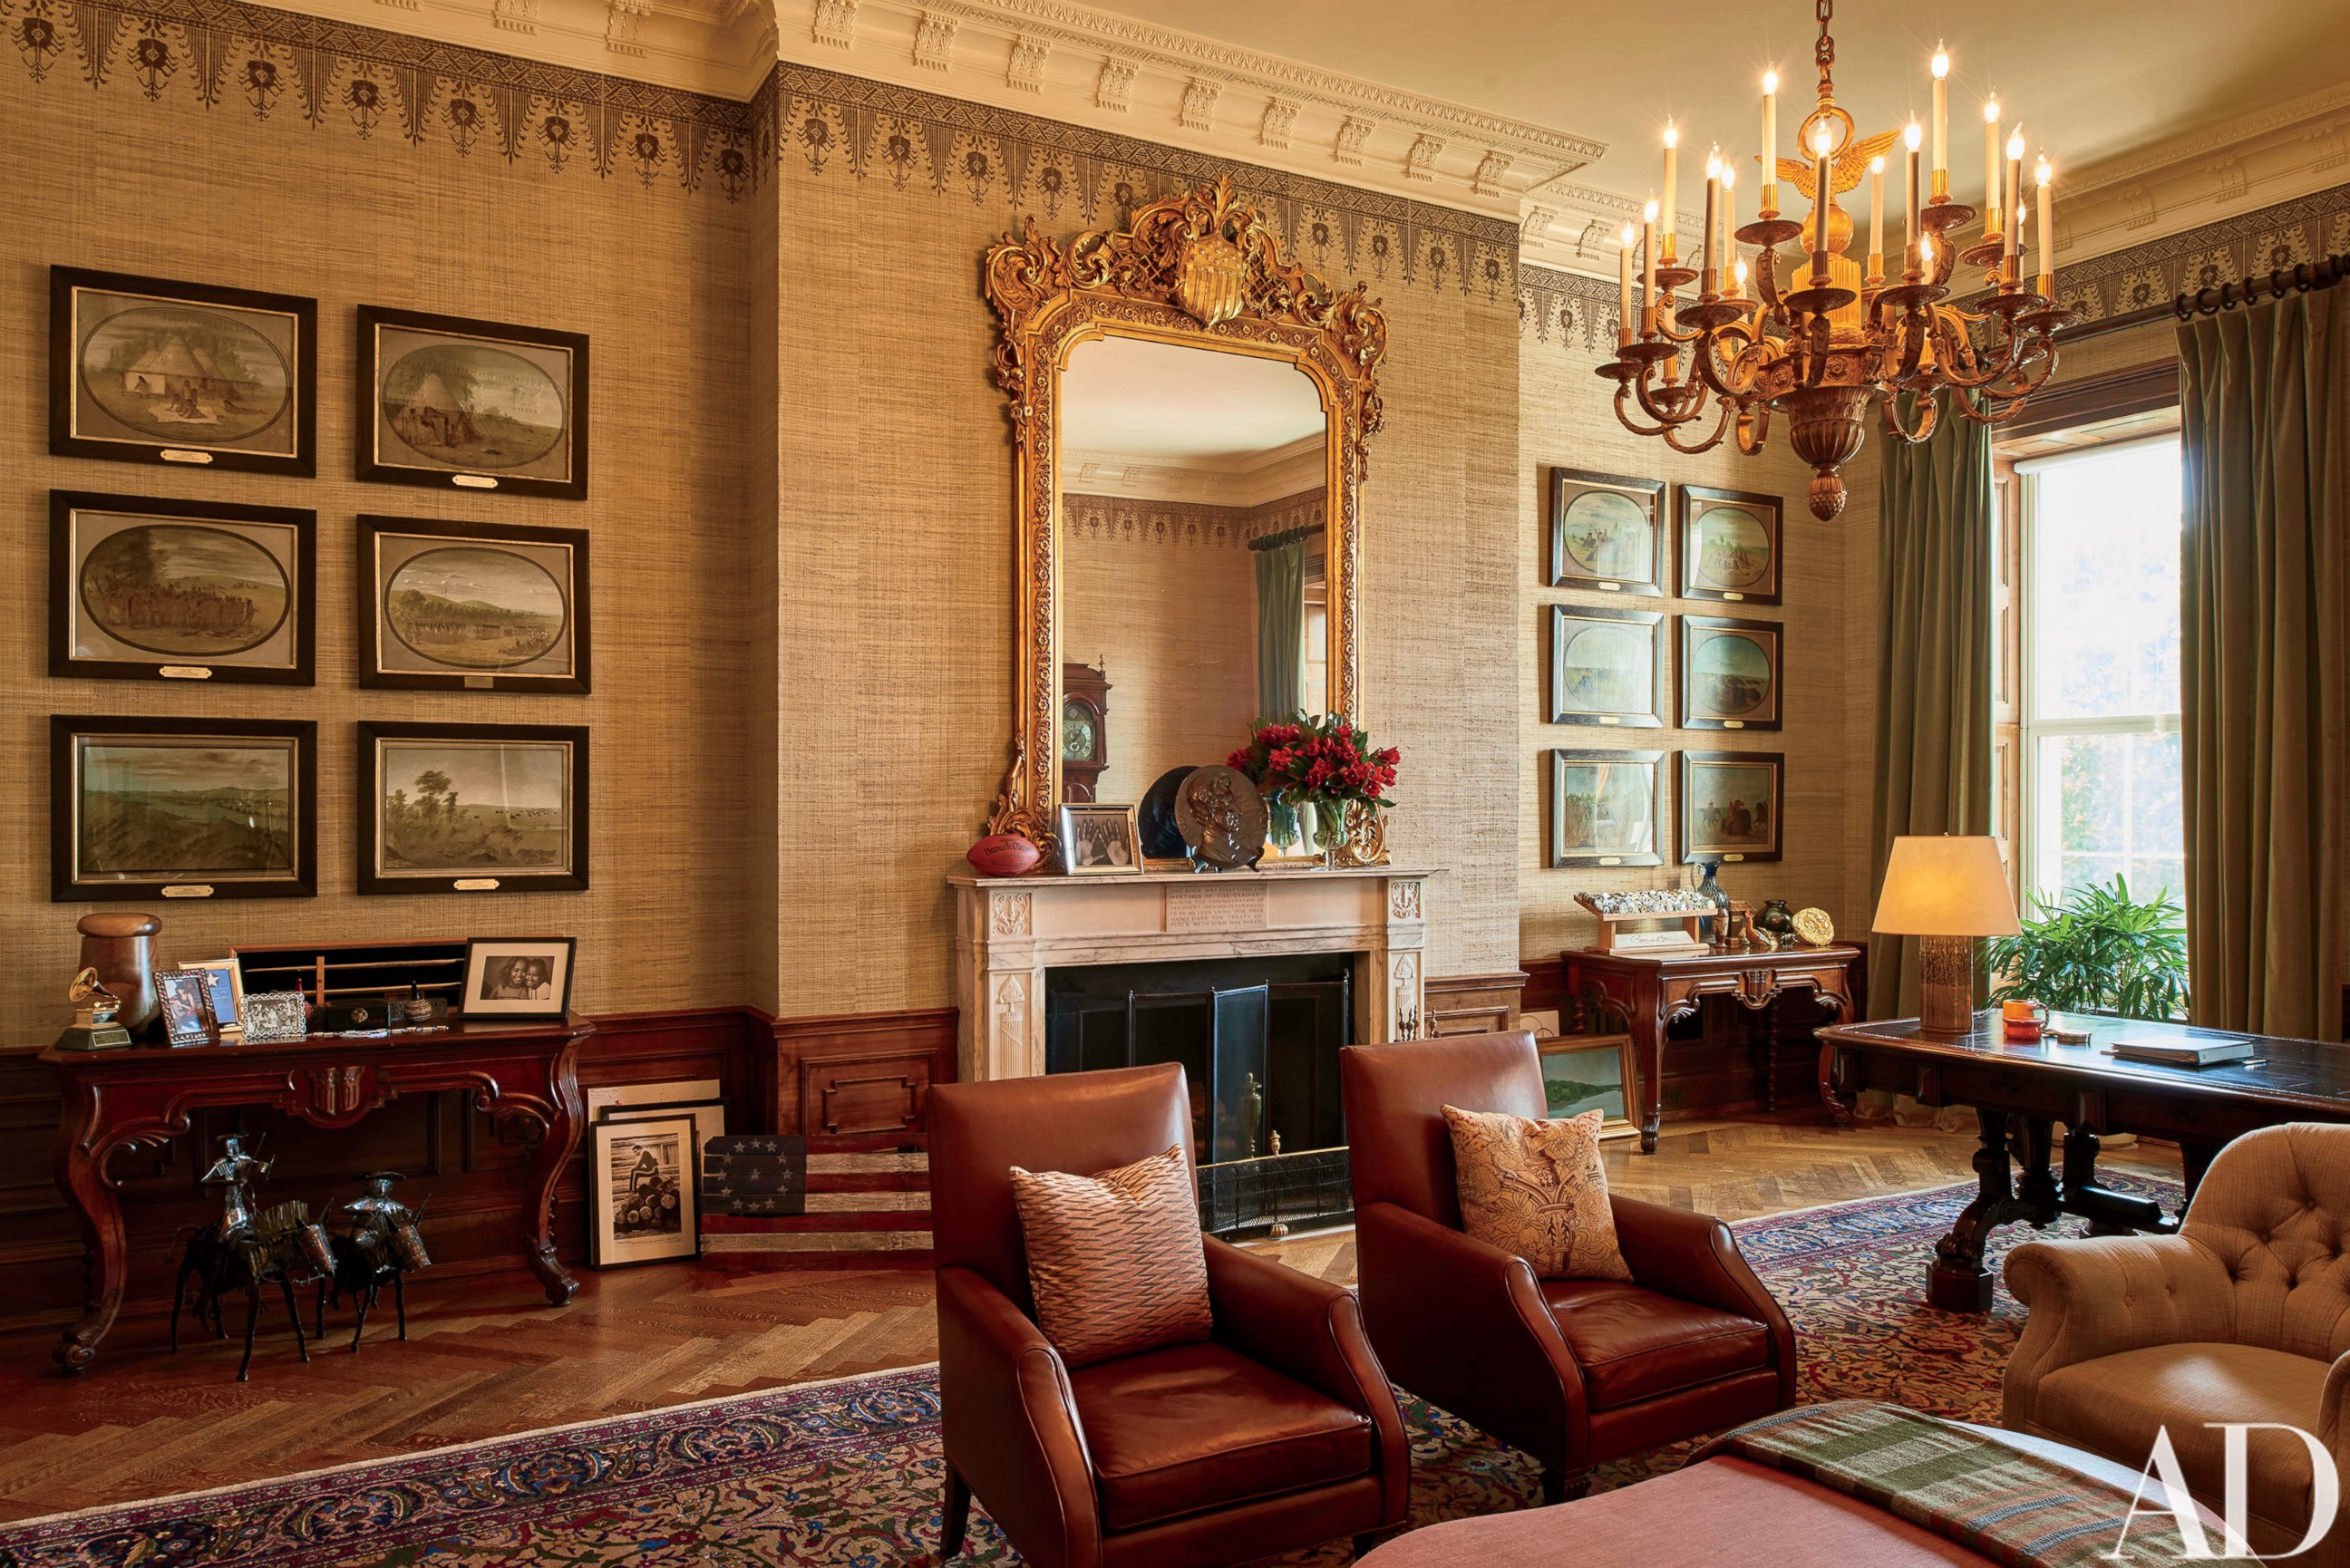 PHOTO: The White House Treaty Room. Architectural Digest's December issue features a look inside the White House and the Obama family's private quarters.